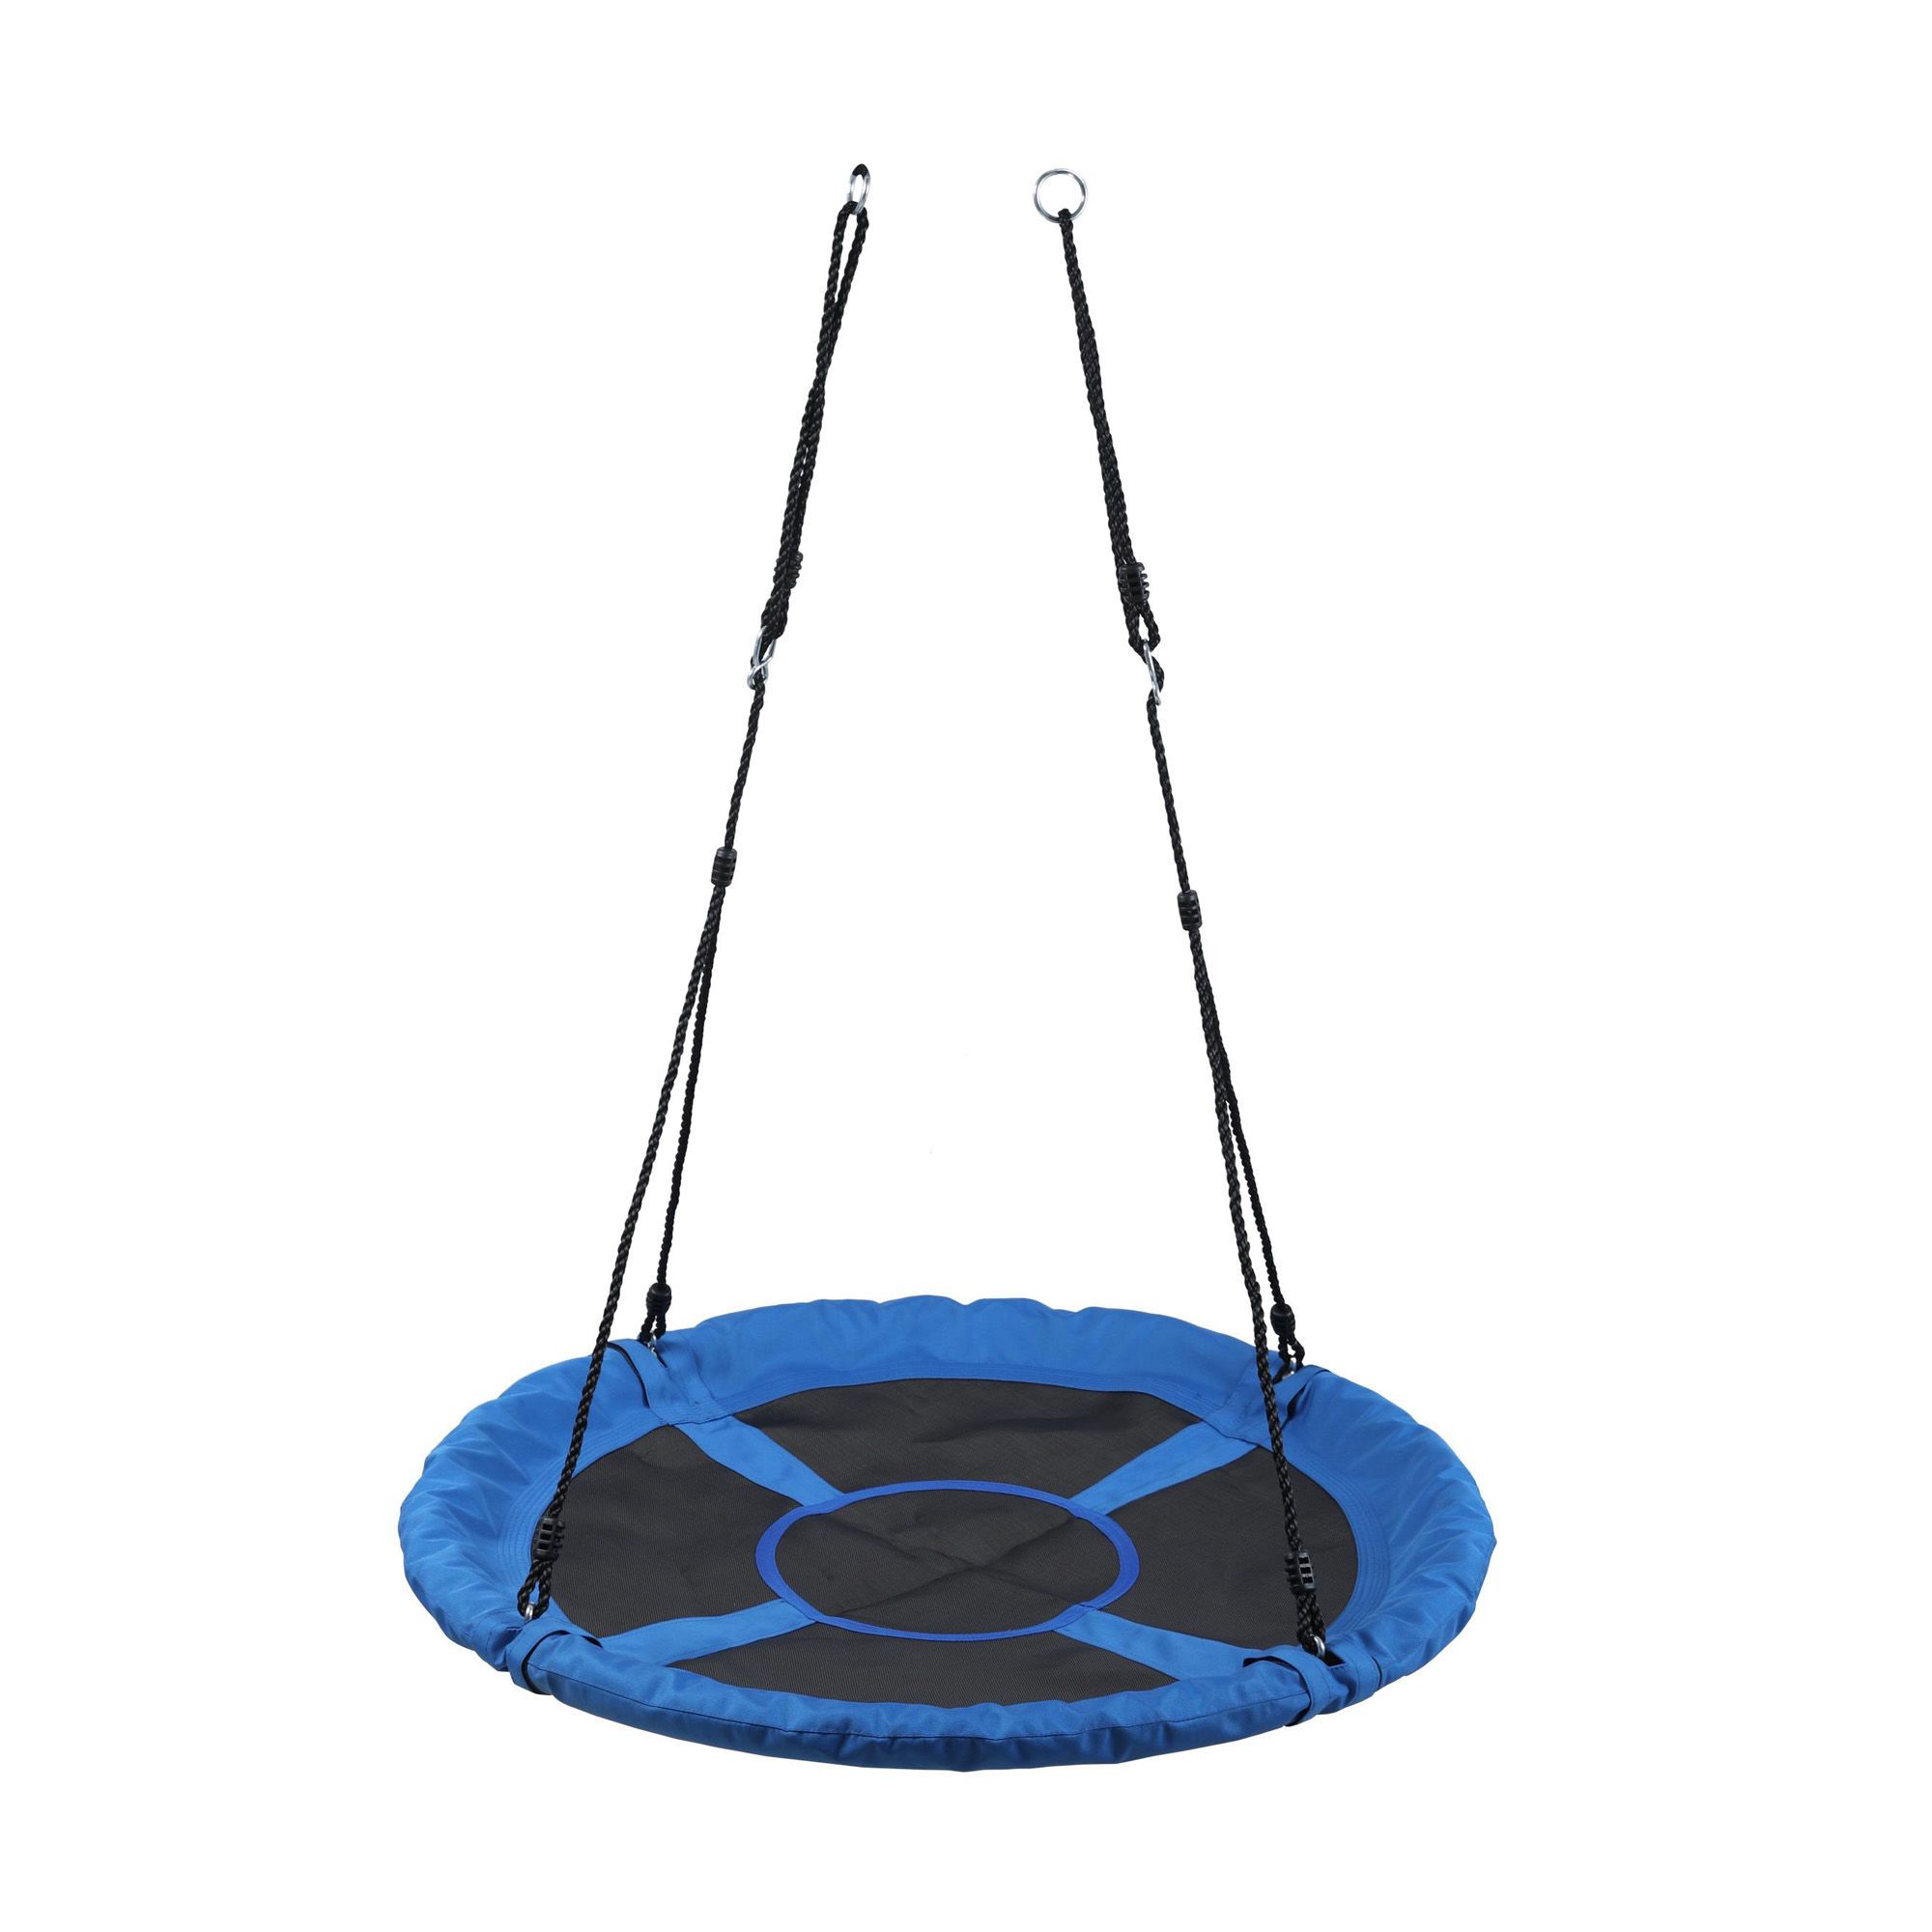 Tree Swing for Children - 100 x 180 cm from FIXEL